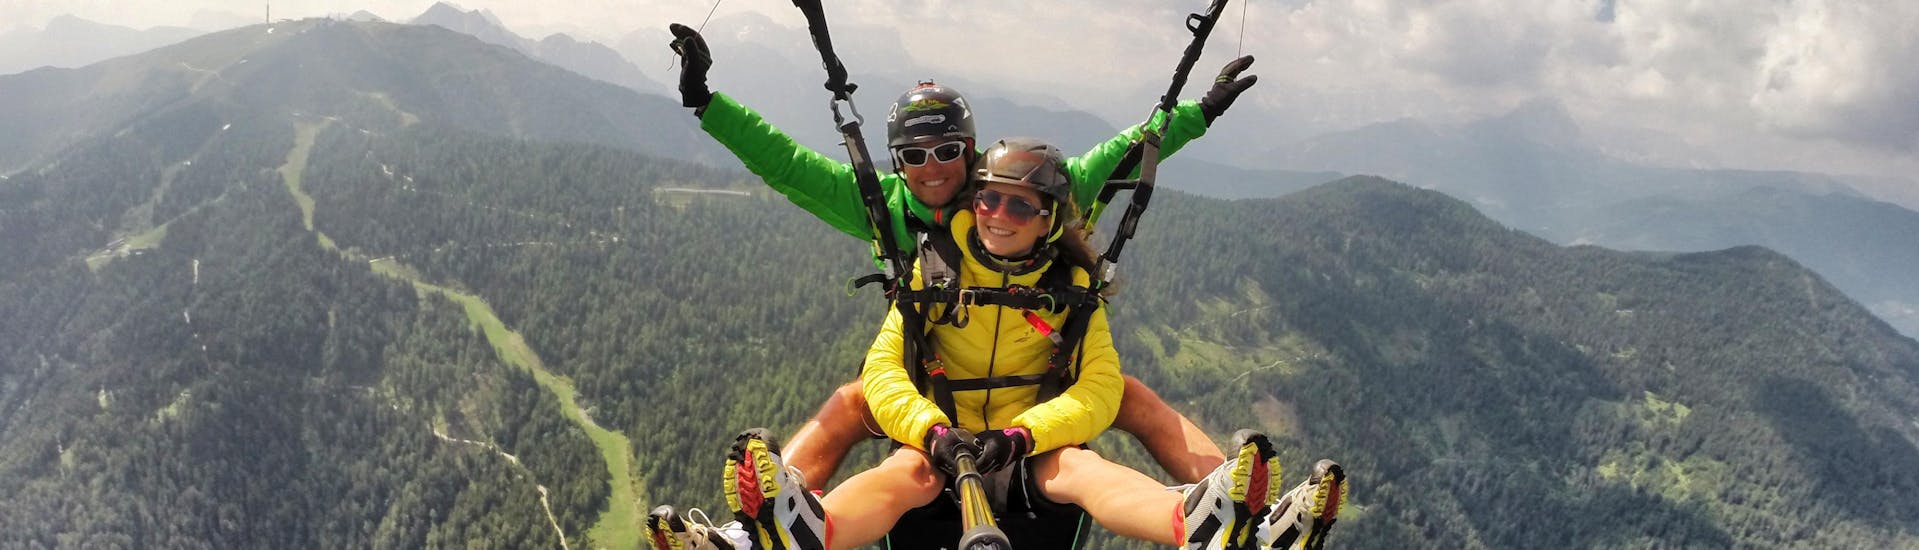 Tandem Paragliding from Monte Spico.